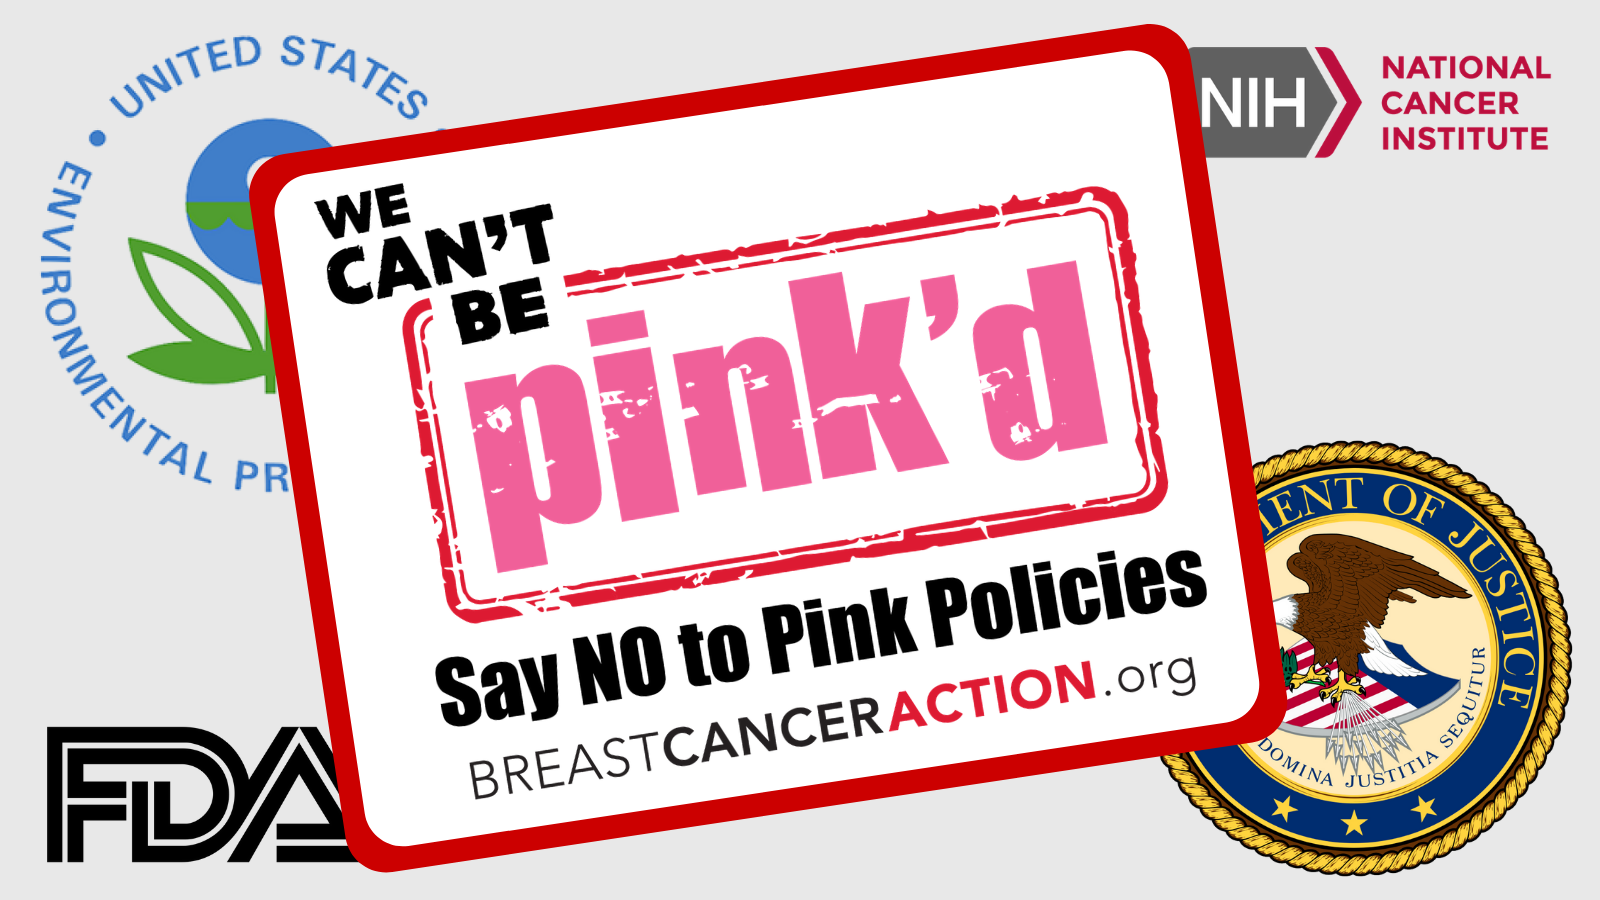 Think Before You Pink 2020 Campaign Image with logo and the logos of the EPA, FDA, NCI, and DOj.